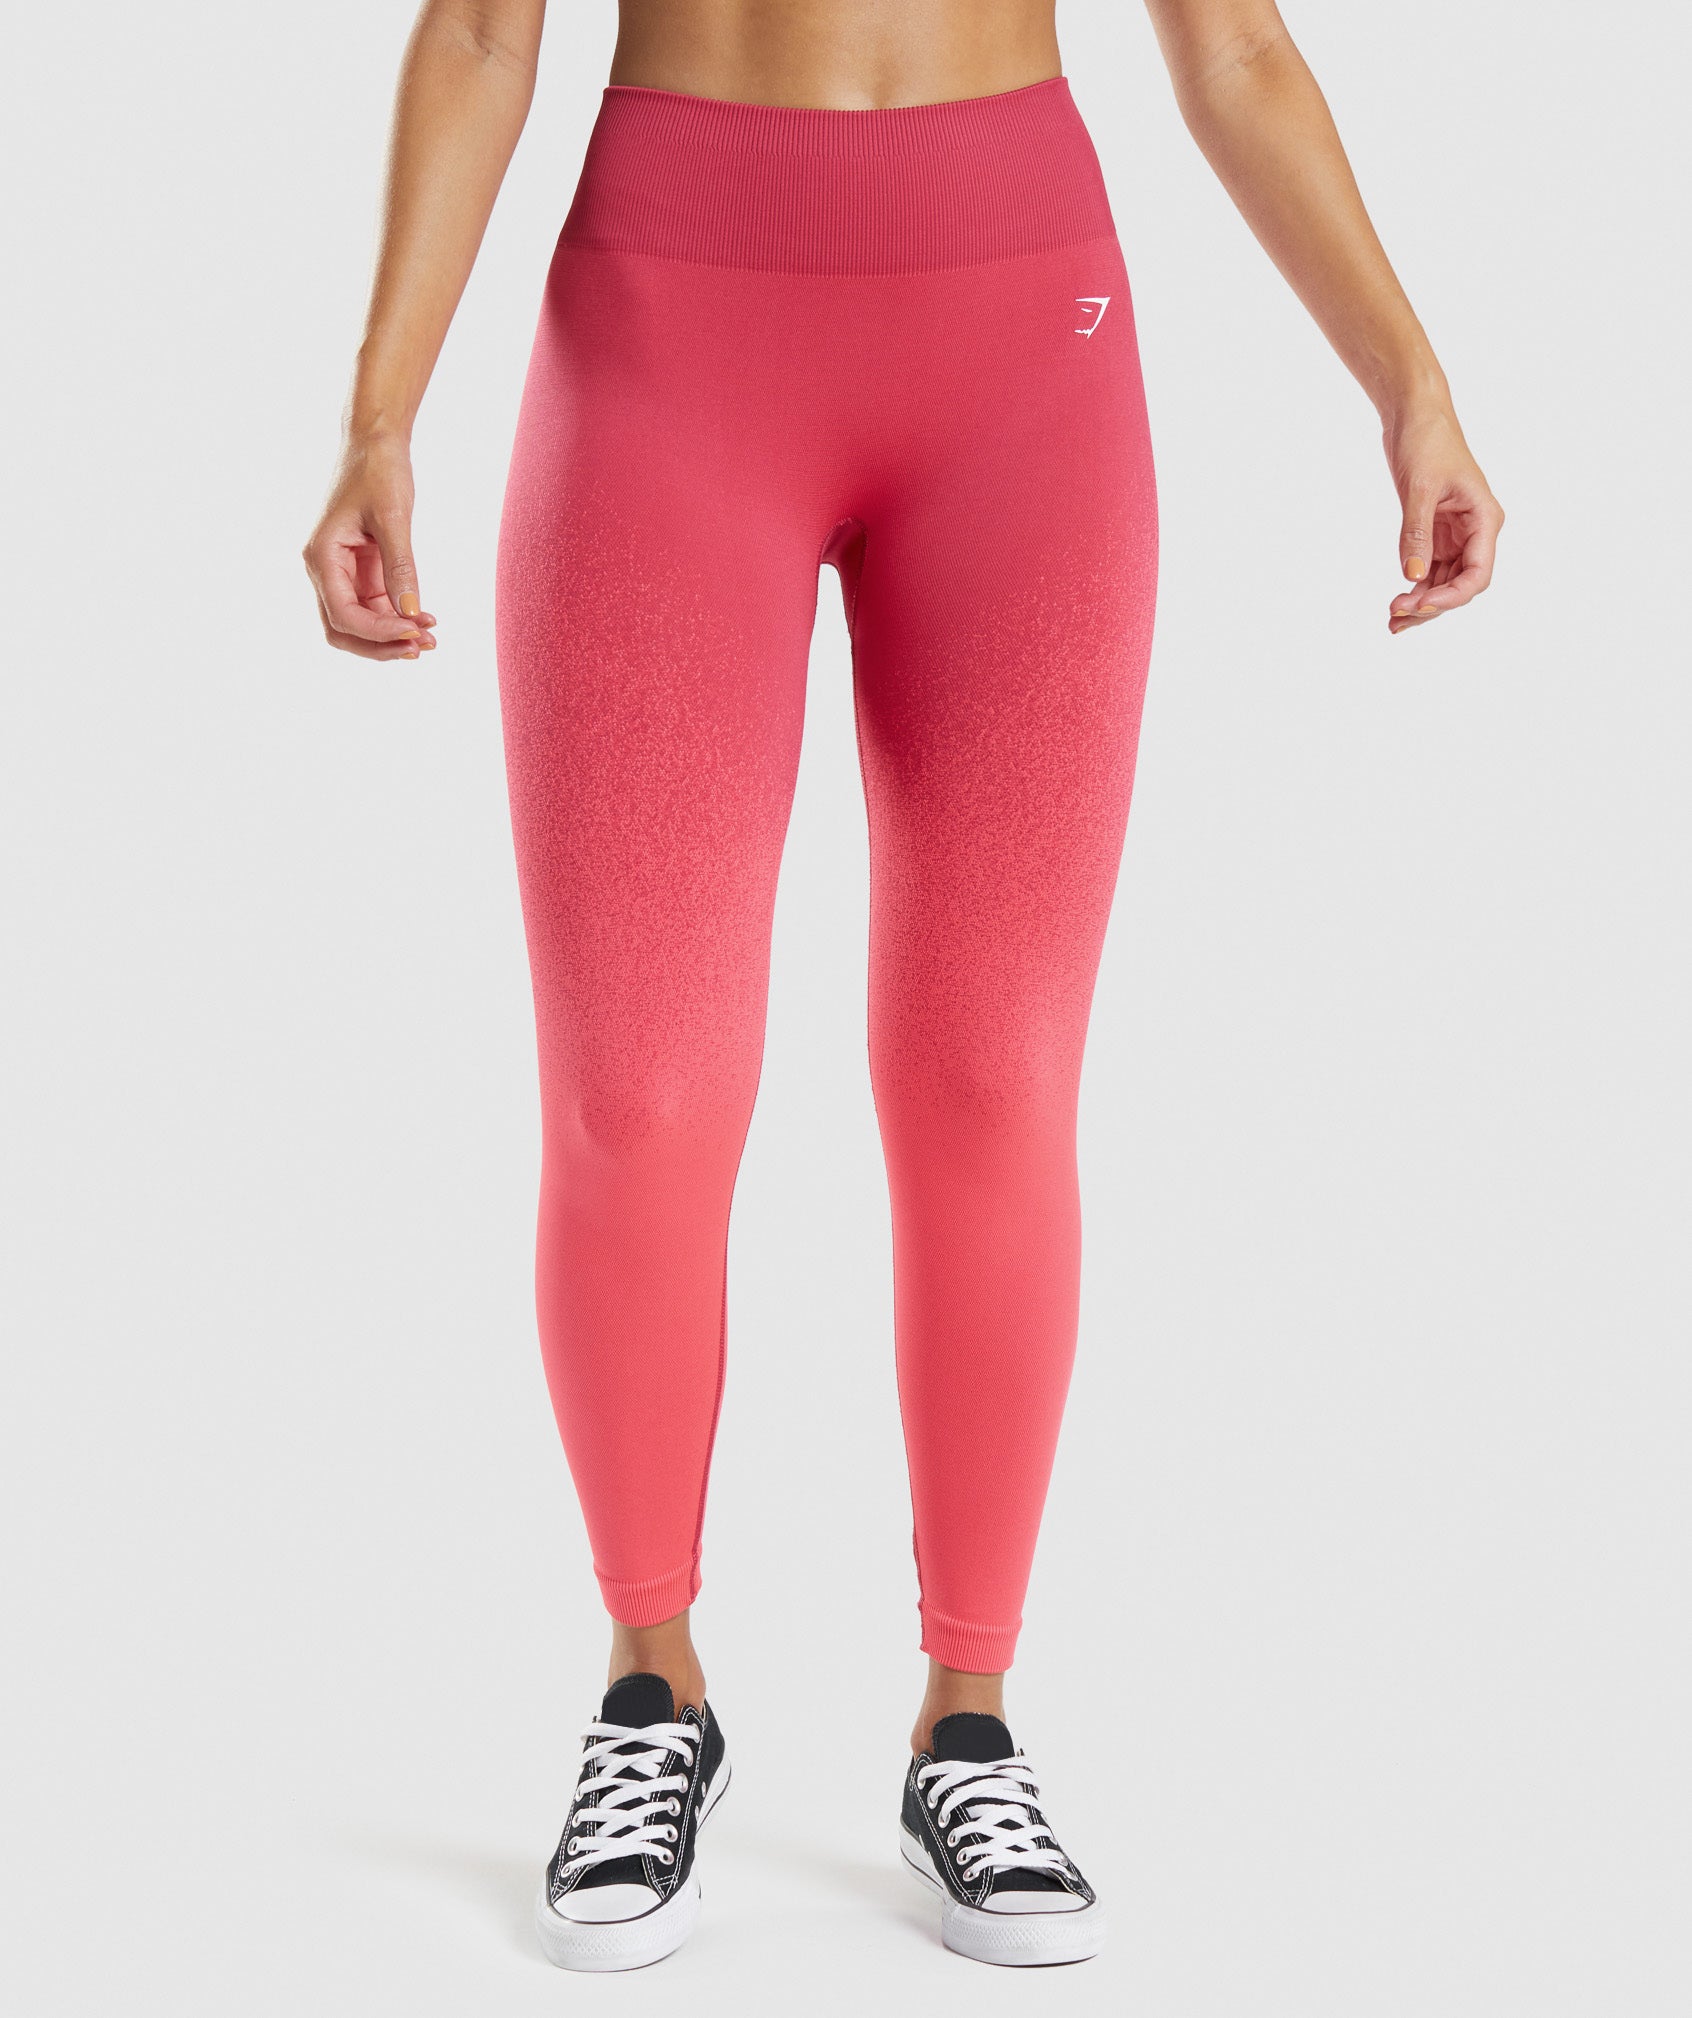 Adapt Seamless Ombre Leggings Collection  Seamless leggings, Womens  workout outfits, Gymshark